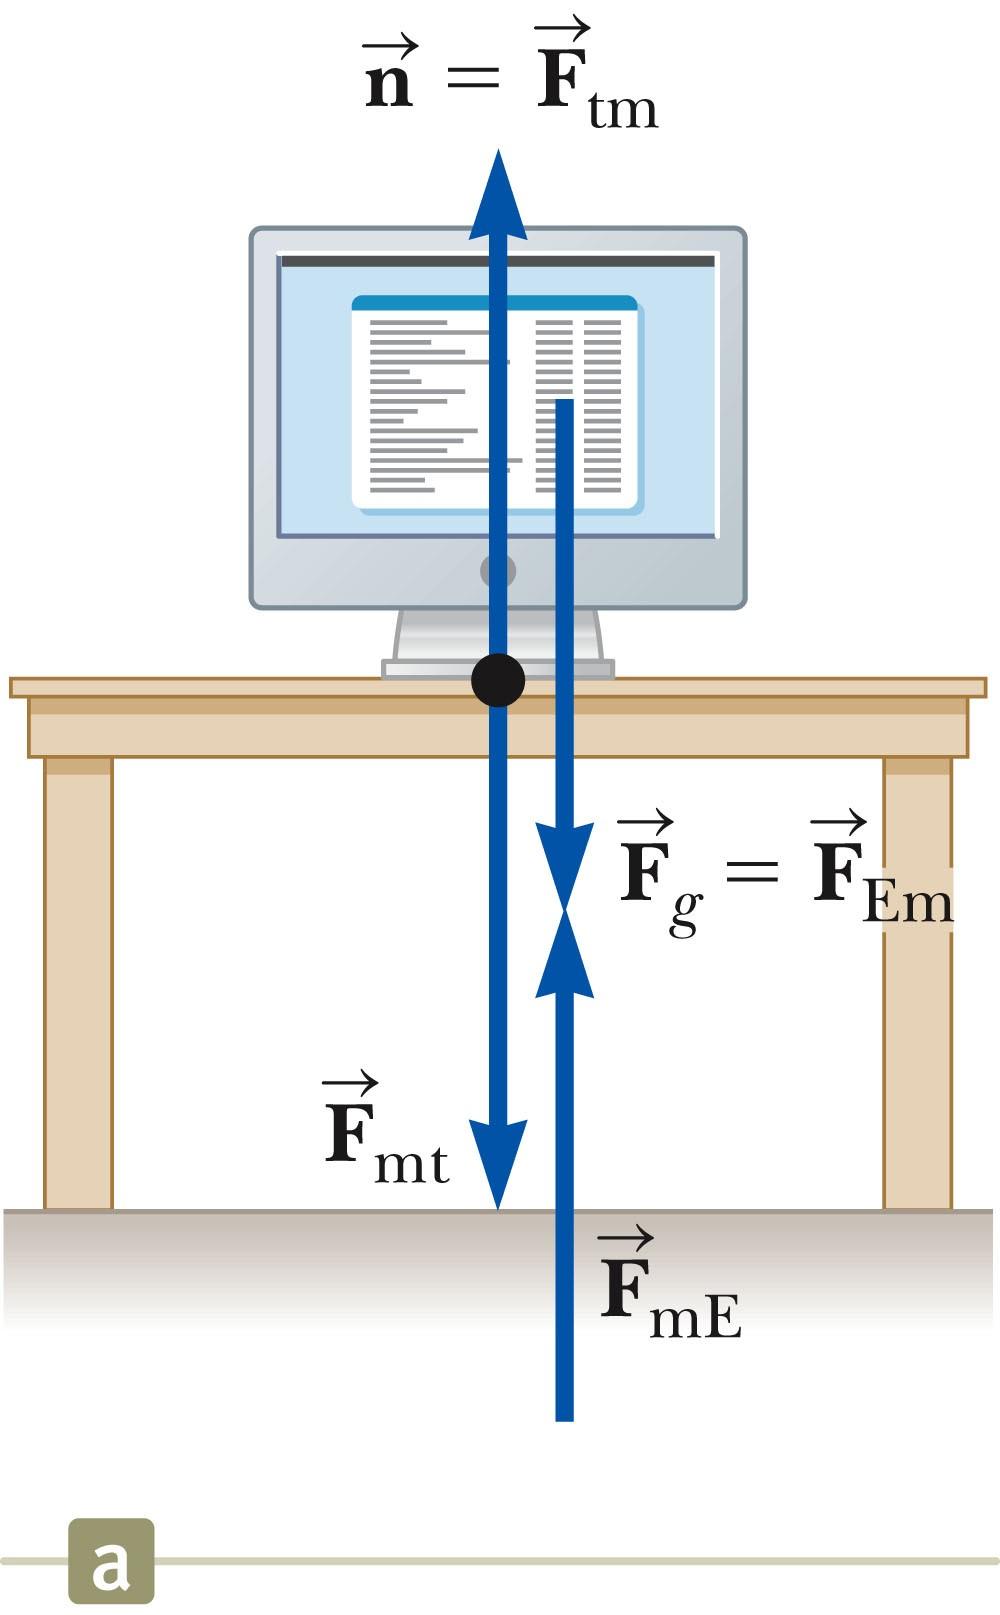 The normal force (table on monitor) is the reaction of the force the monitor exerts on the table.